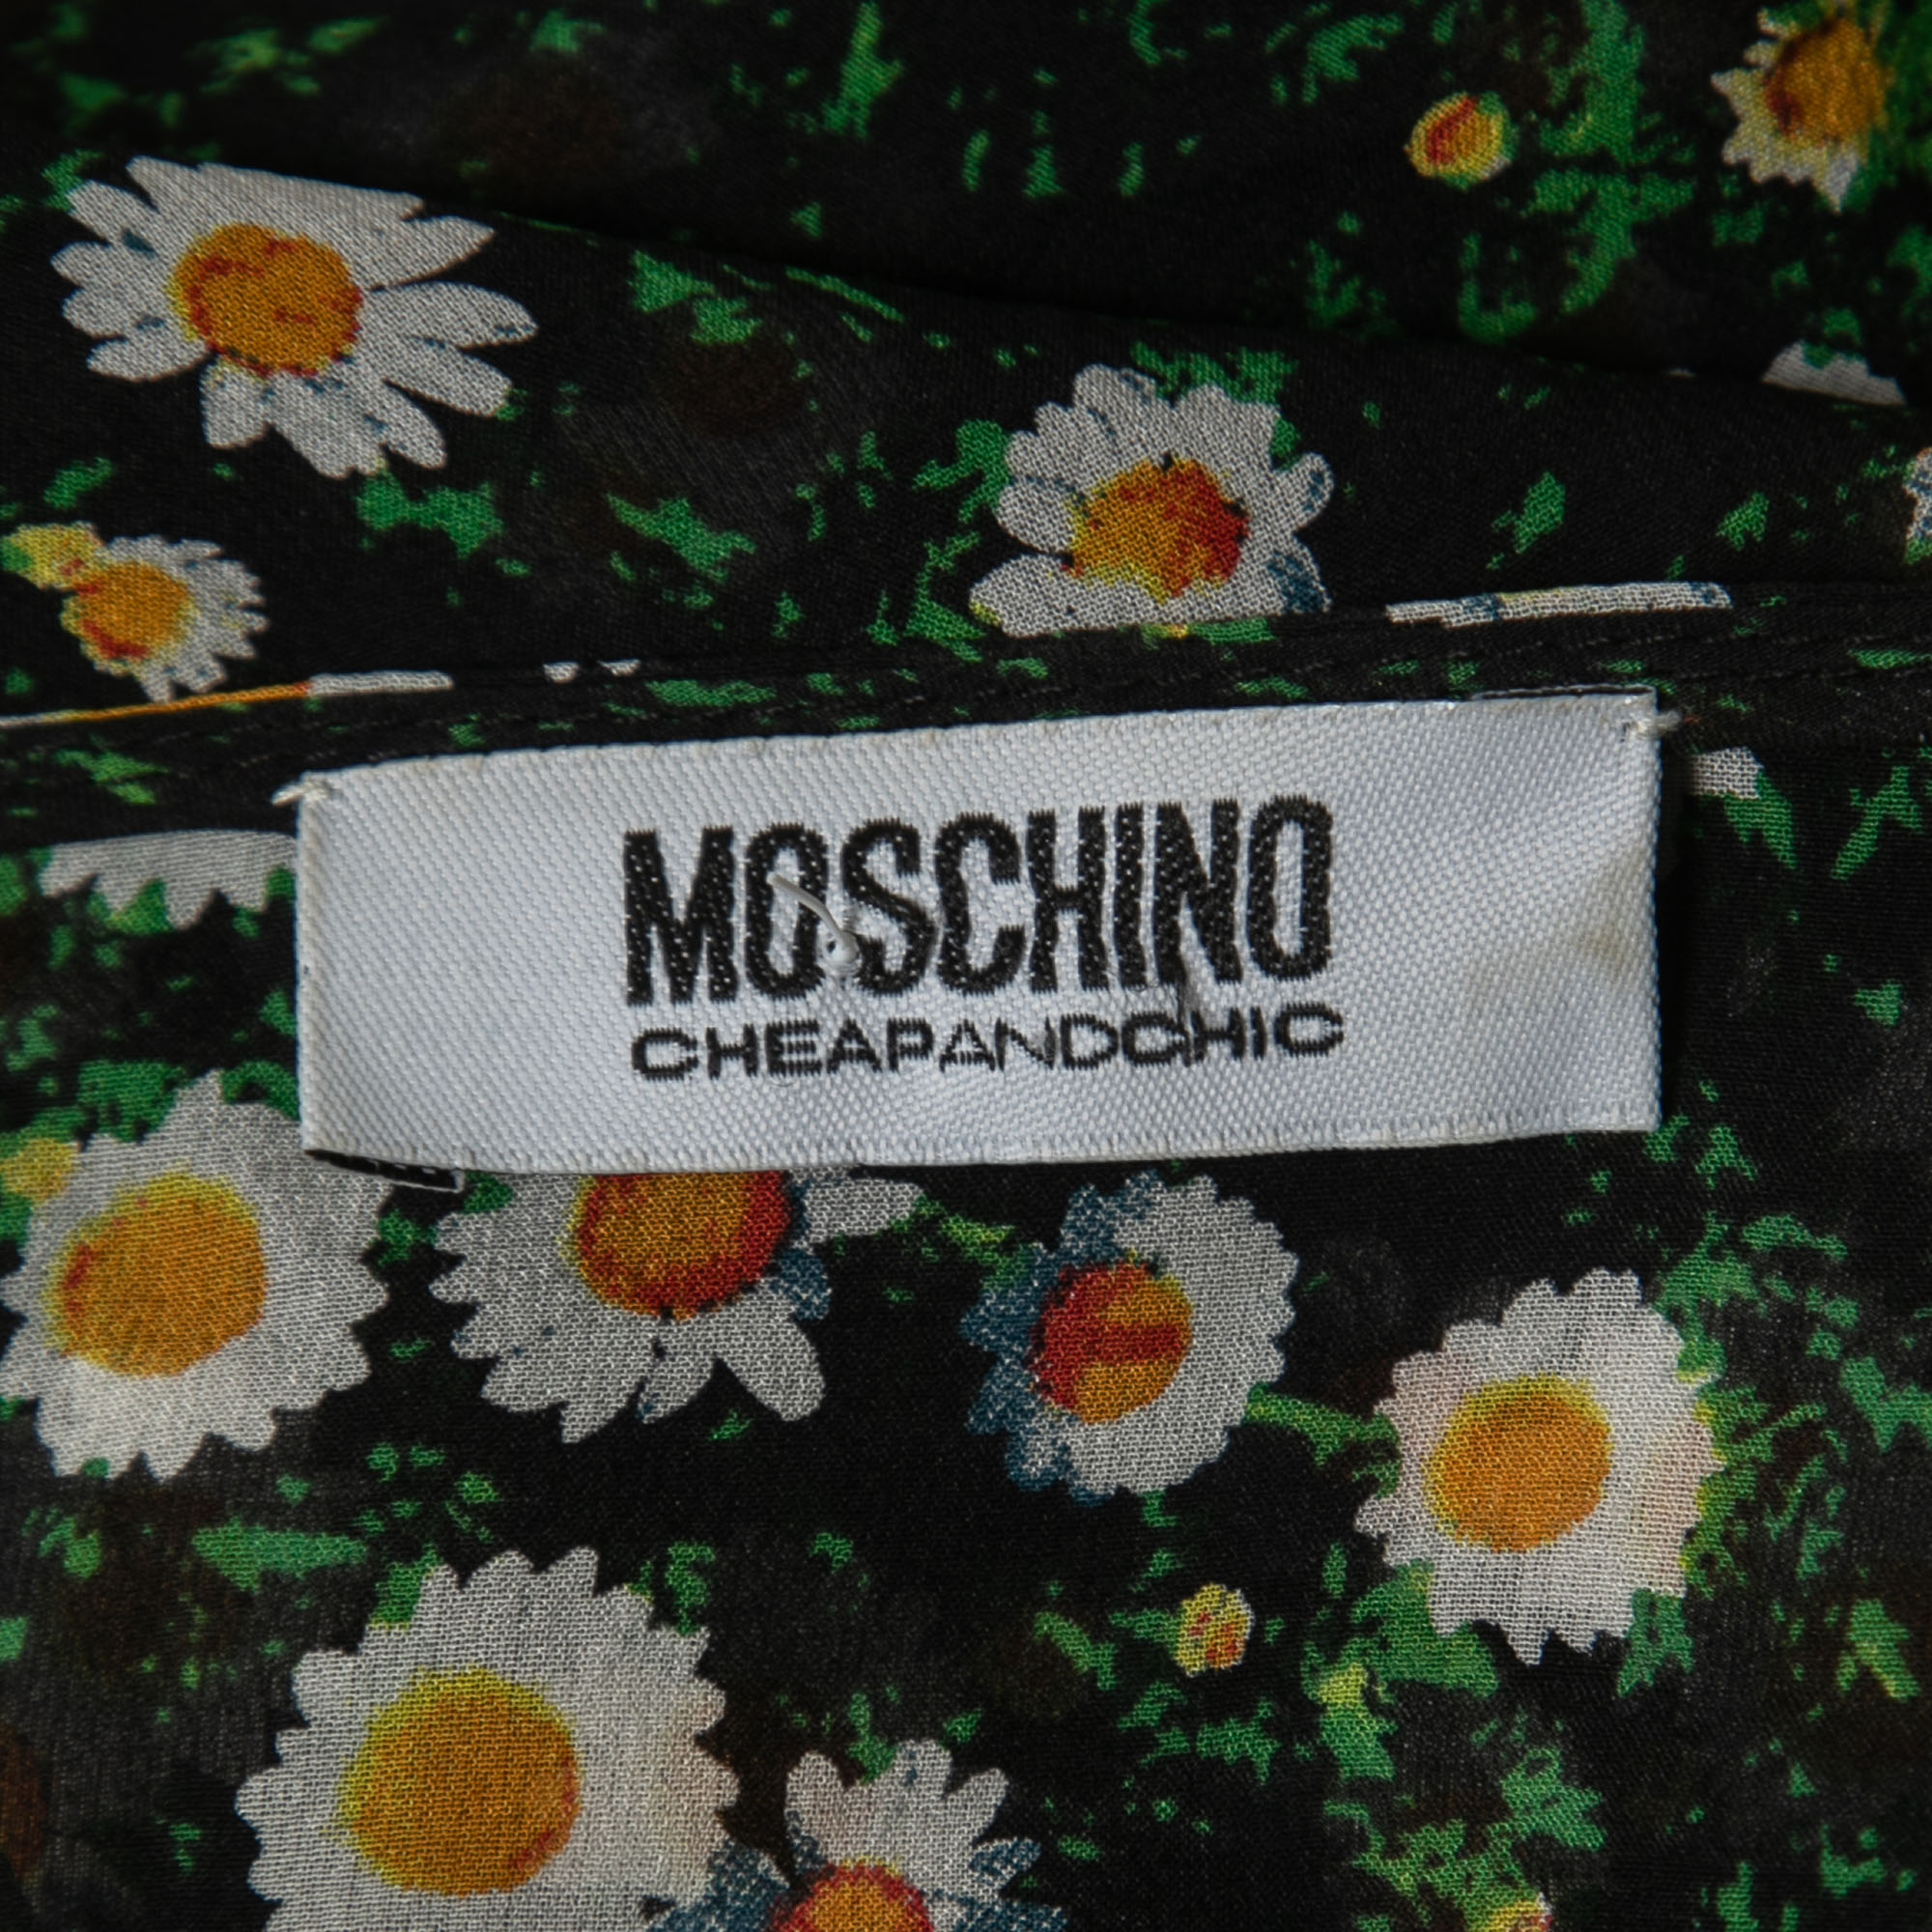 Moschino Cheap And Chic Black Floral Printed Crochet Sleeve Top S